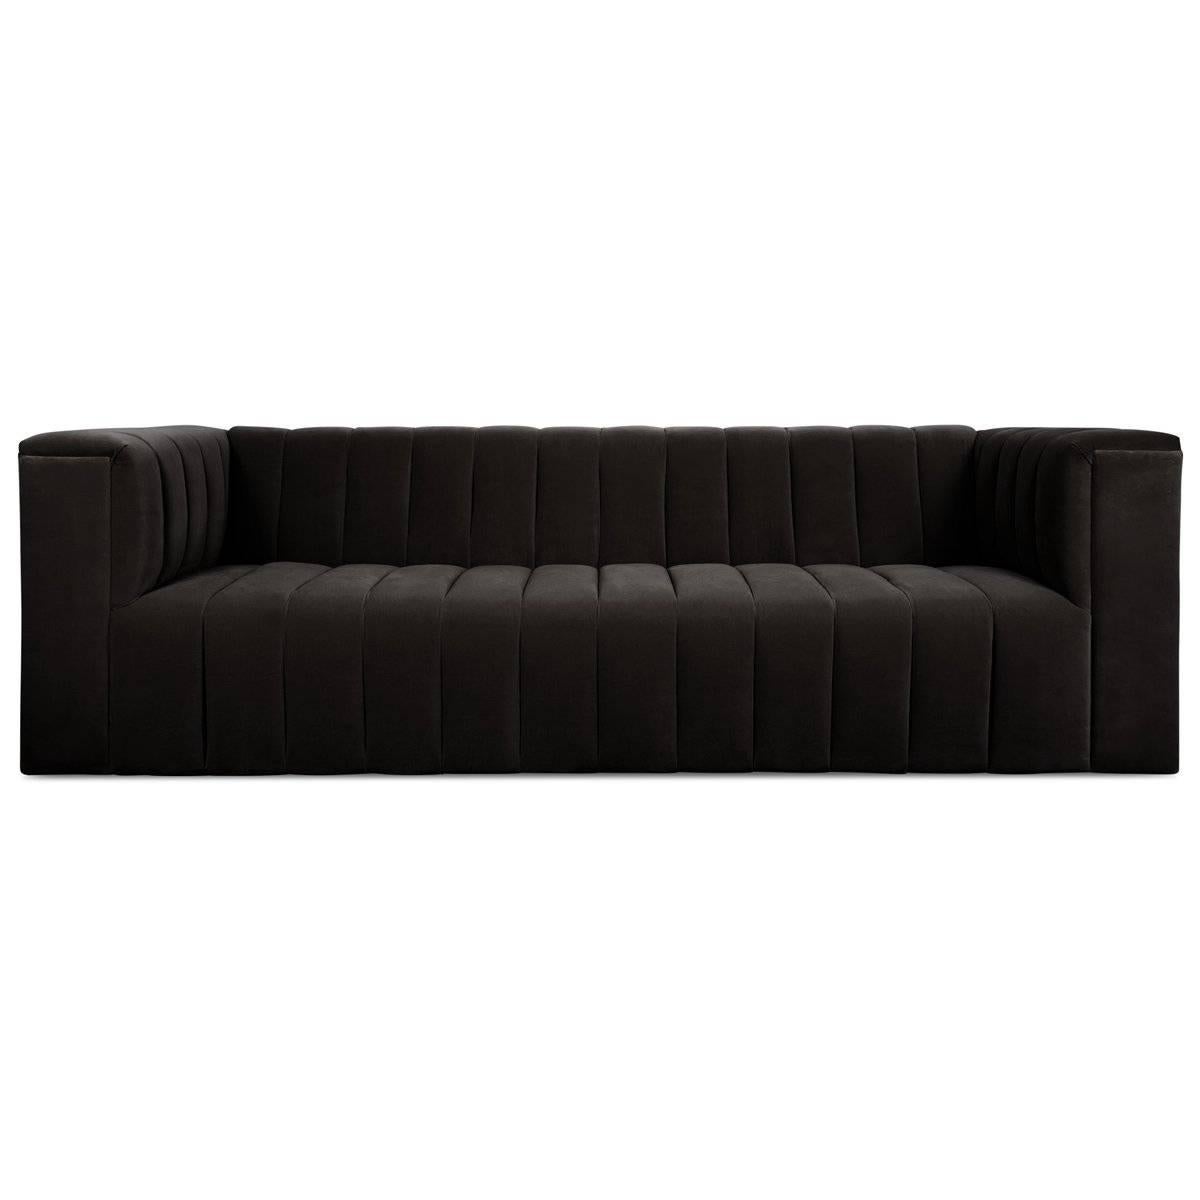 Elevate the level of comfort and style within your home with the Monaco sofa in lush velvet. Though the black color and bold design lend this sofa the ability to stand alone, none can deny the brilliance and style it will add to any room. Features